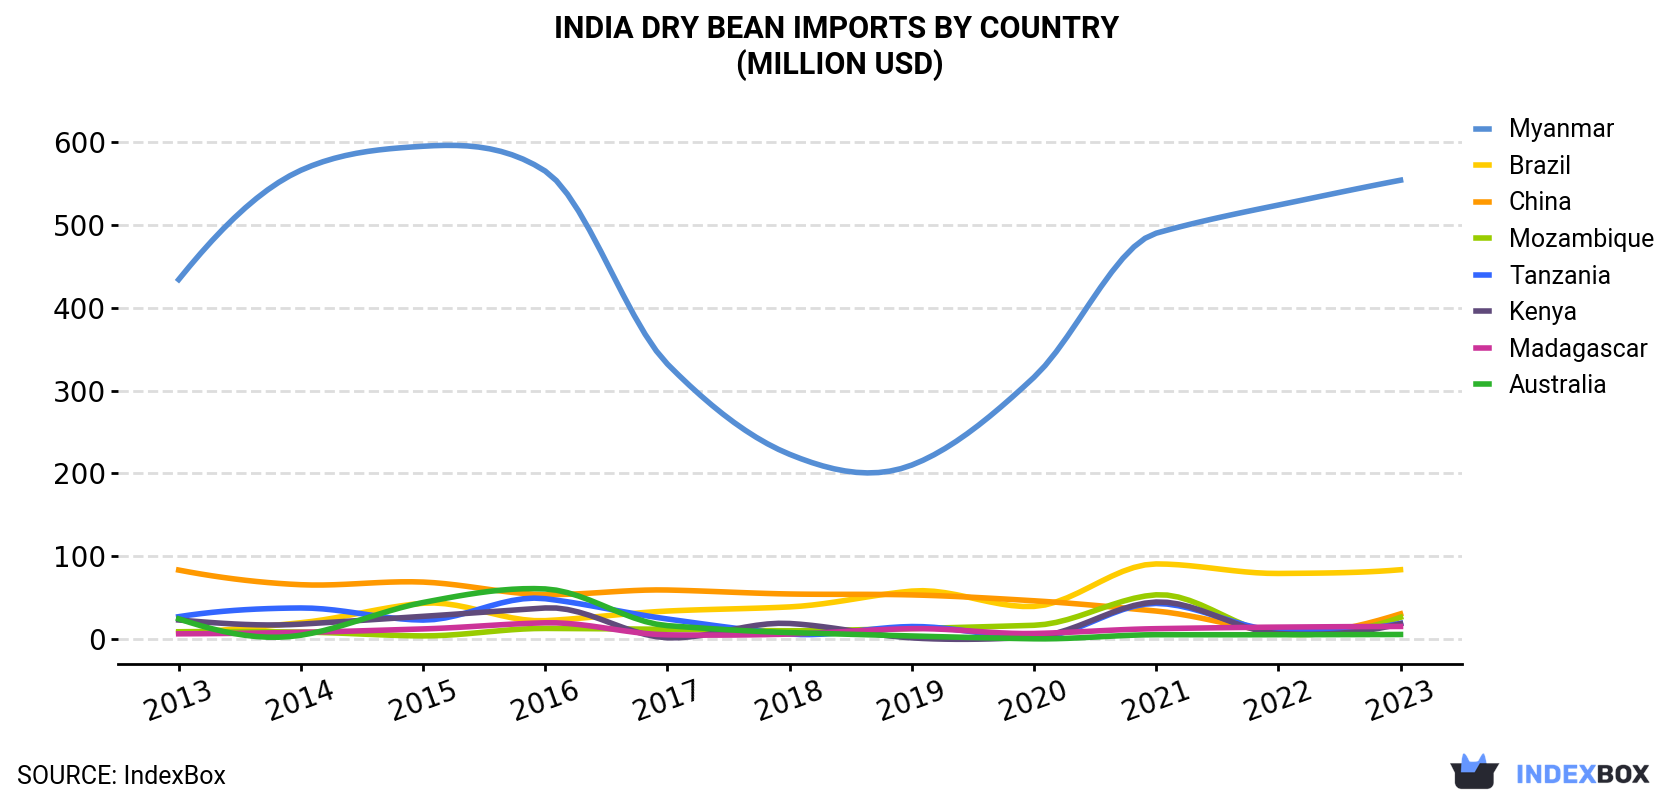 India Dry Bean Imports By Country (Million USD)